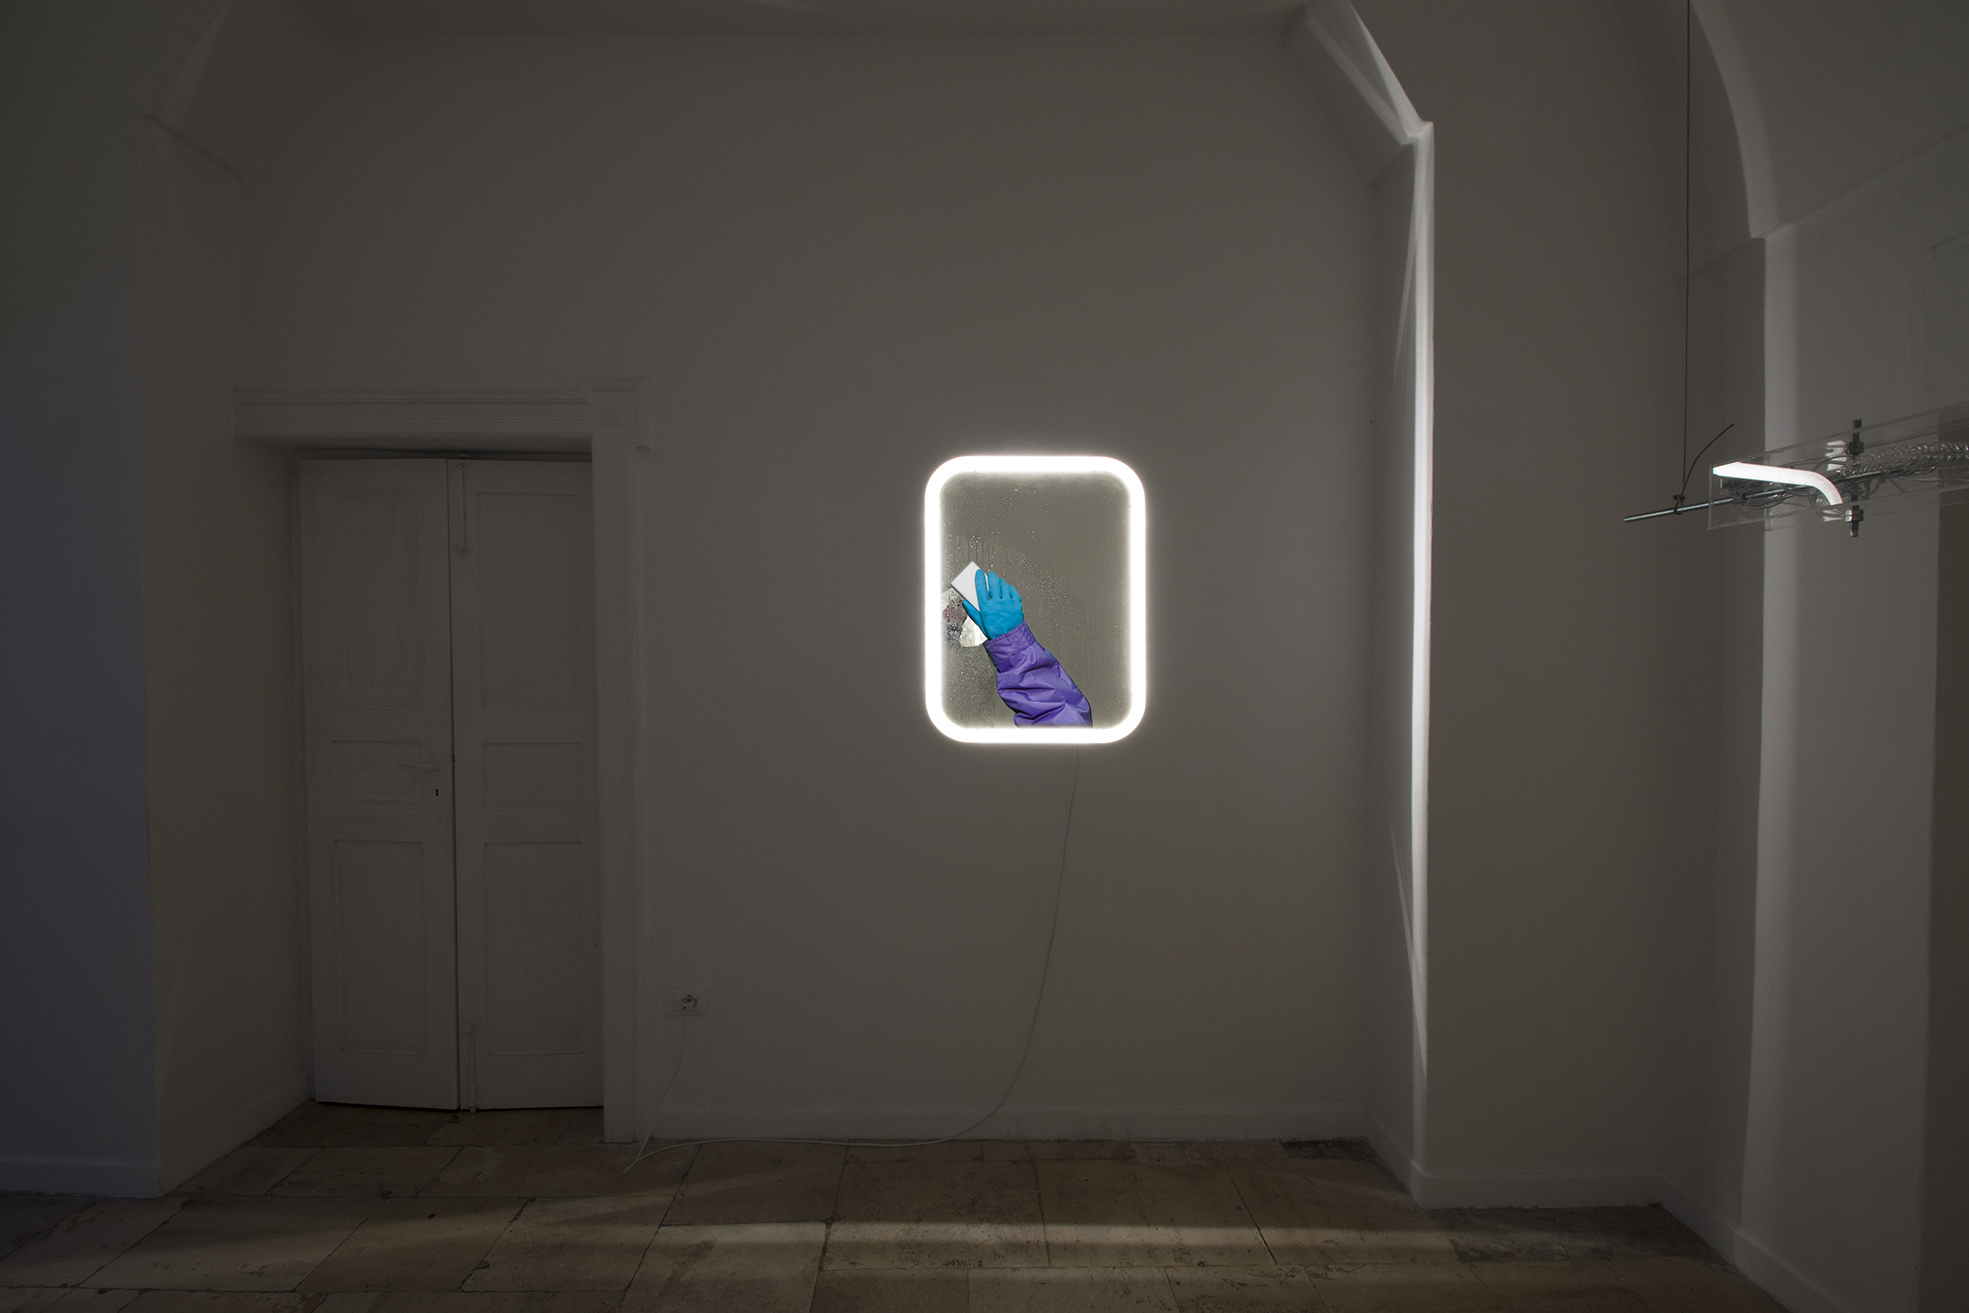 Maurizio Viceré, Camouflage an’ Soda #2, Storjorm mirror, diffused led, print, dew effect, 80 x 60 x 8 cm. 2018.